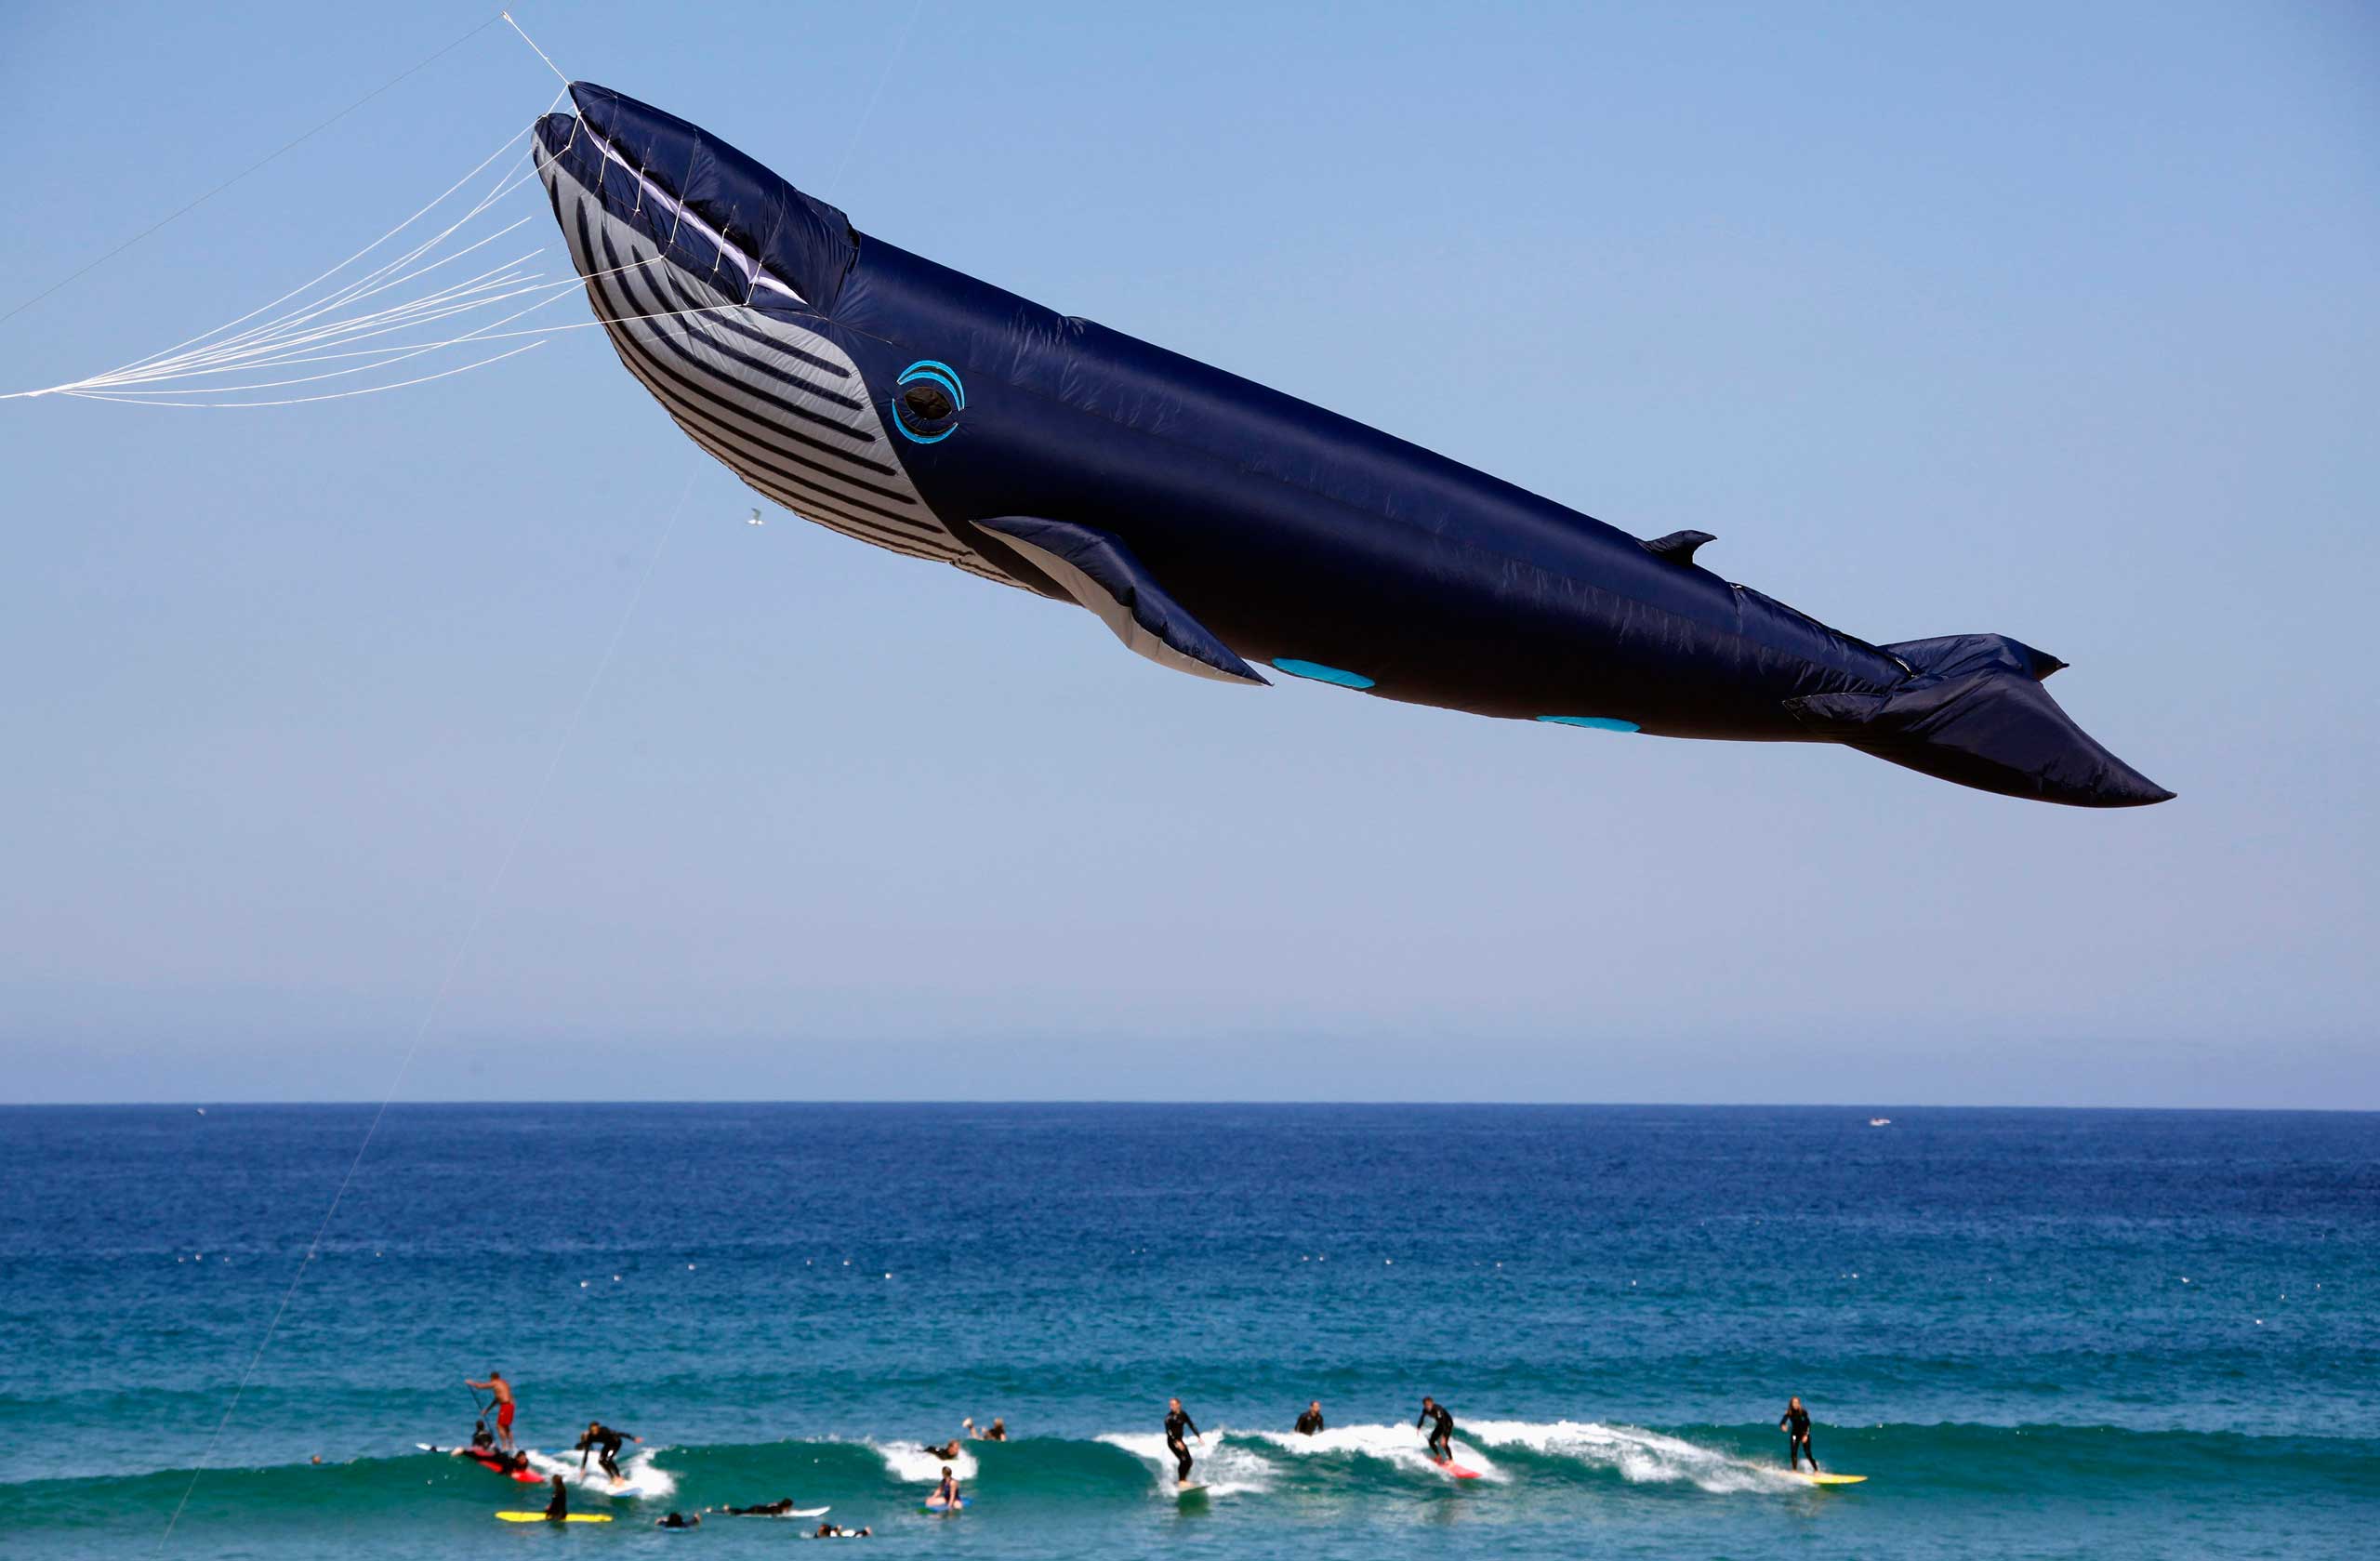 Surfers ride a wave as a whale-shaped kite flies above them during the annual Festival of the Winds at Sydney's Bondi Beach on Sept. 14, 2014.